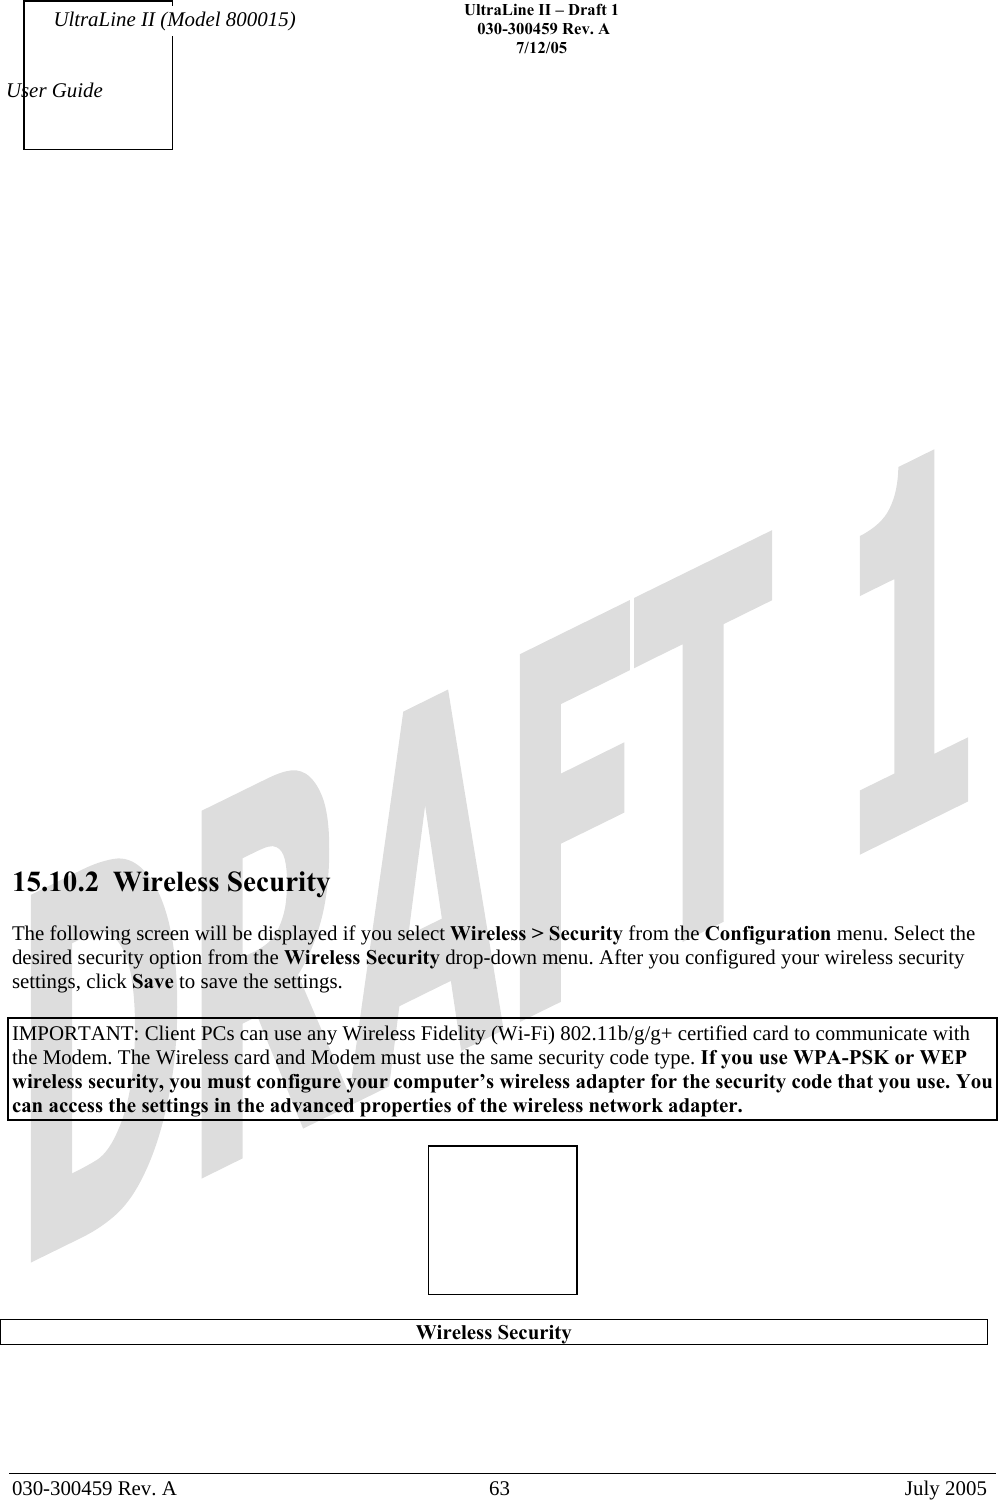    UltraLine II – Draft 1   030-300459 Rev. A 7/12/05   030-300459 Rev. A  63  July 2005  User Guide UltraLine II (Model 800015)                            15.10.2  Wireless Security  The following screen will be displayed if you select Wireless &gt; Security from the Configuration menu. Select the desired security option from the Wireless Security drop-down menu. After you configured your wireless security settings, click Save to save the settings.   IMPORTANT: Client PCs can use any Wireless Fidelity (Wi-Fi) 802.11b/g/g+ certified card to communicate with the Modem. The Wireless card and Modem must use the same security code type. If you use WPA-PSK or WEP wireless security, you must configure your computer’s wireless adapter for the security code that you use. You can access the settings in the advanced properties of the wireless network adapter.    Wireless Security  